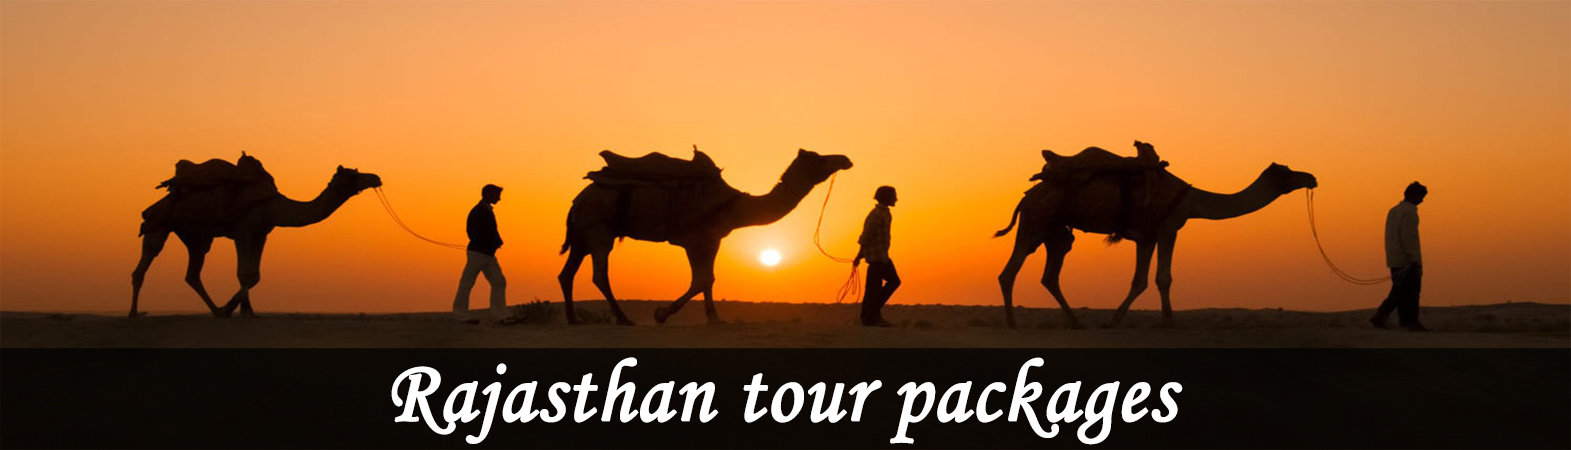 Rajasthan Tour package, Rajasthan Best travel company